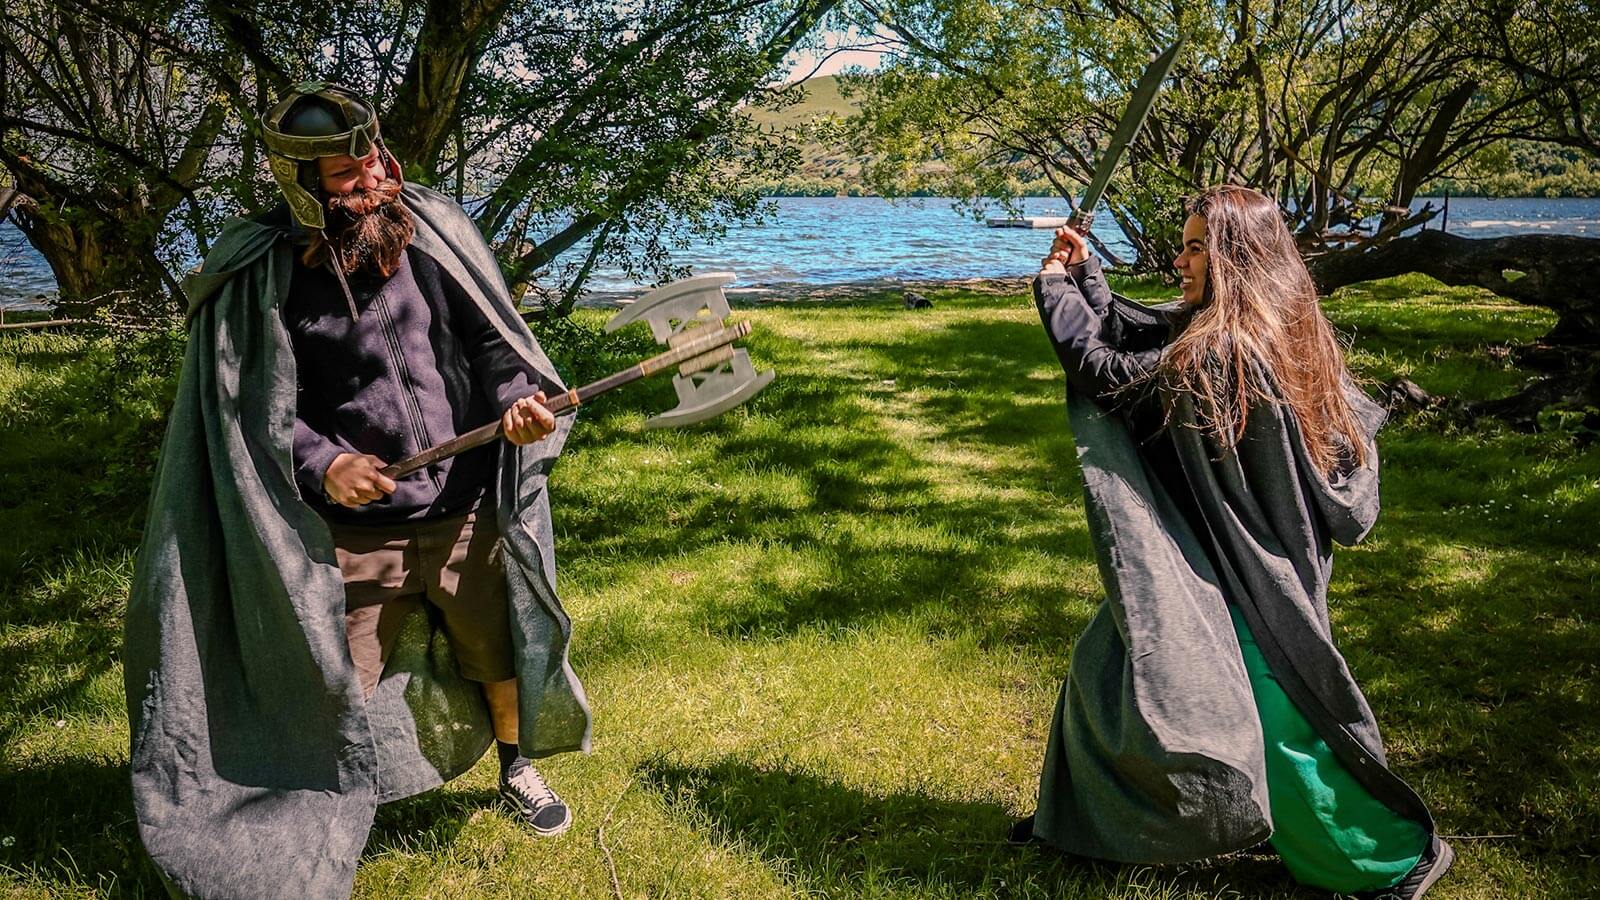 Couple dressed in Lord of the Rings costumes re-enacting a battle scene